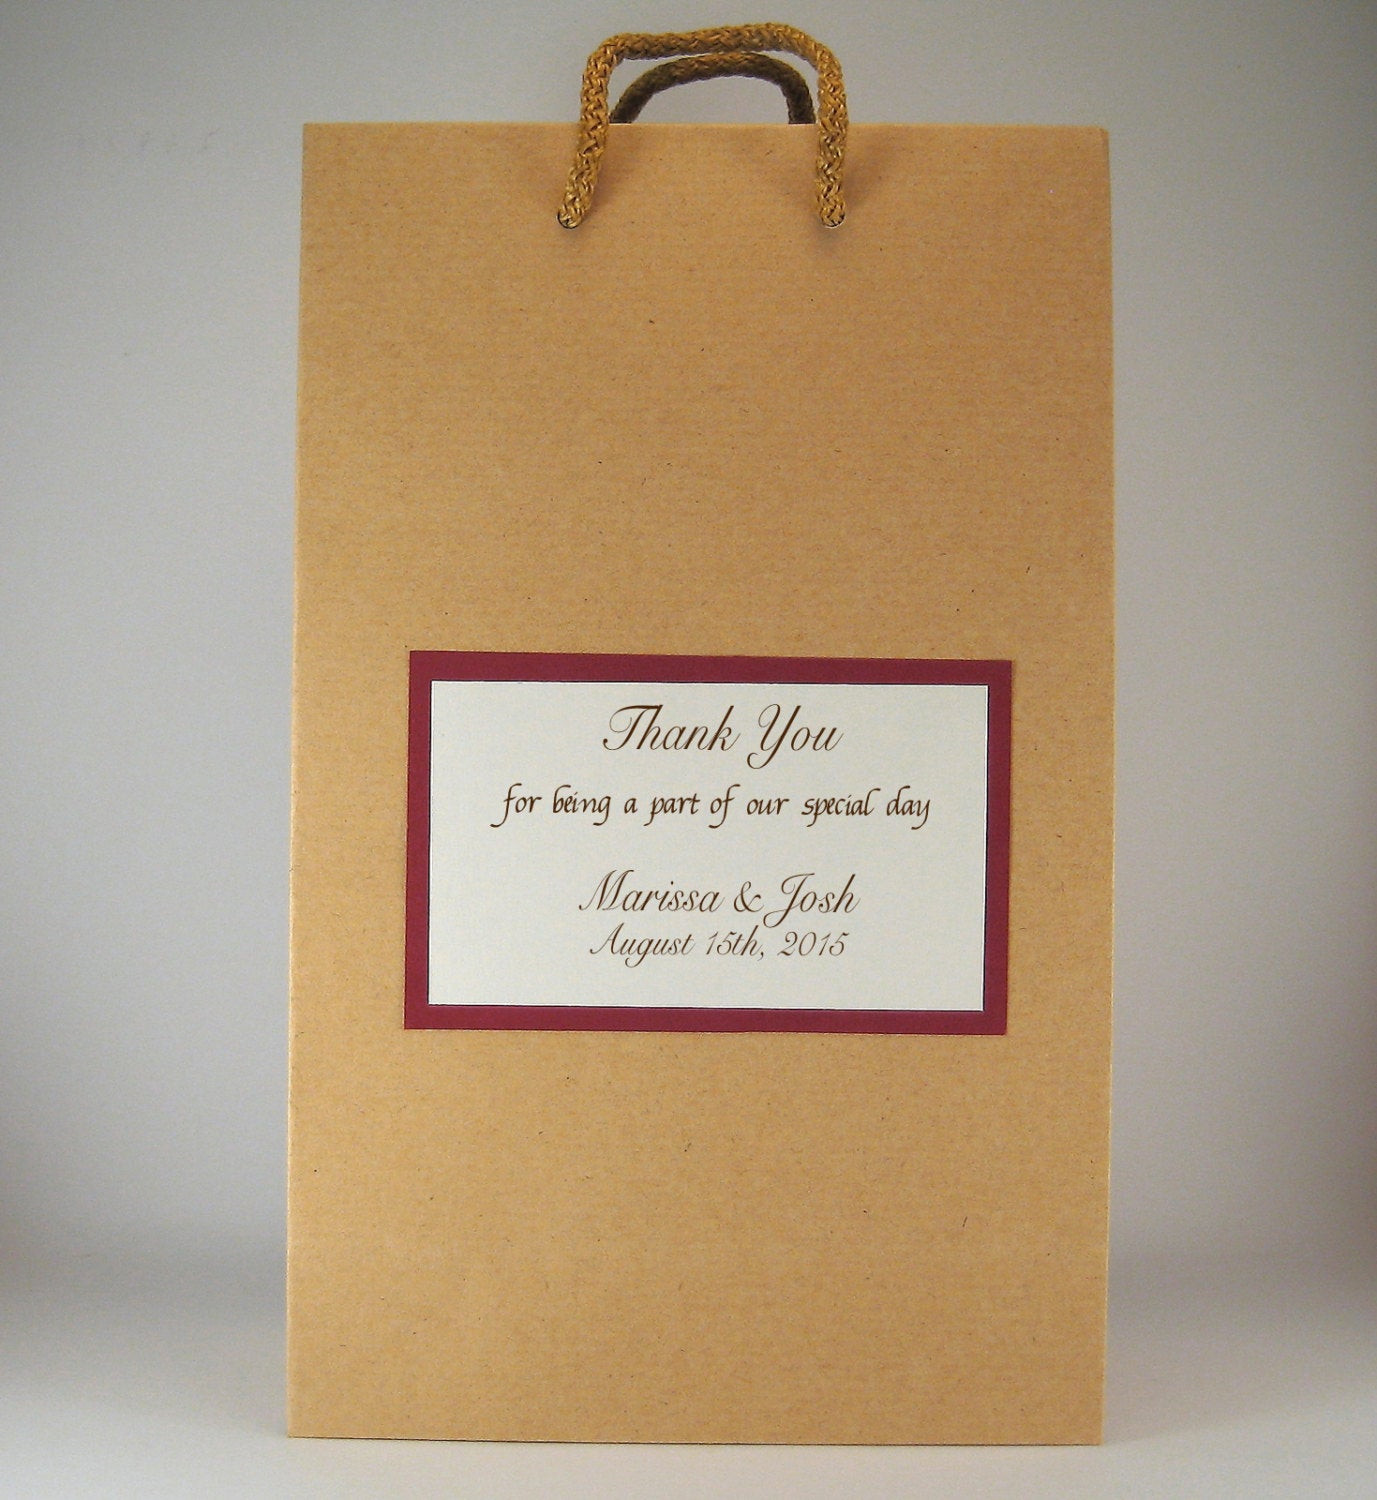 Personalized Wedding Favor Bags
 Personalized Wedding Favor Bags 50 Rustic Wedding Gift Bags